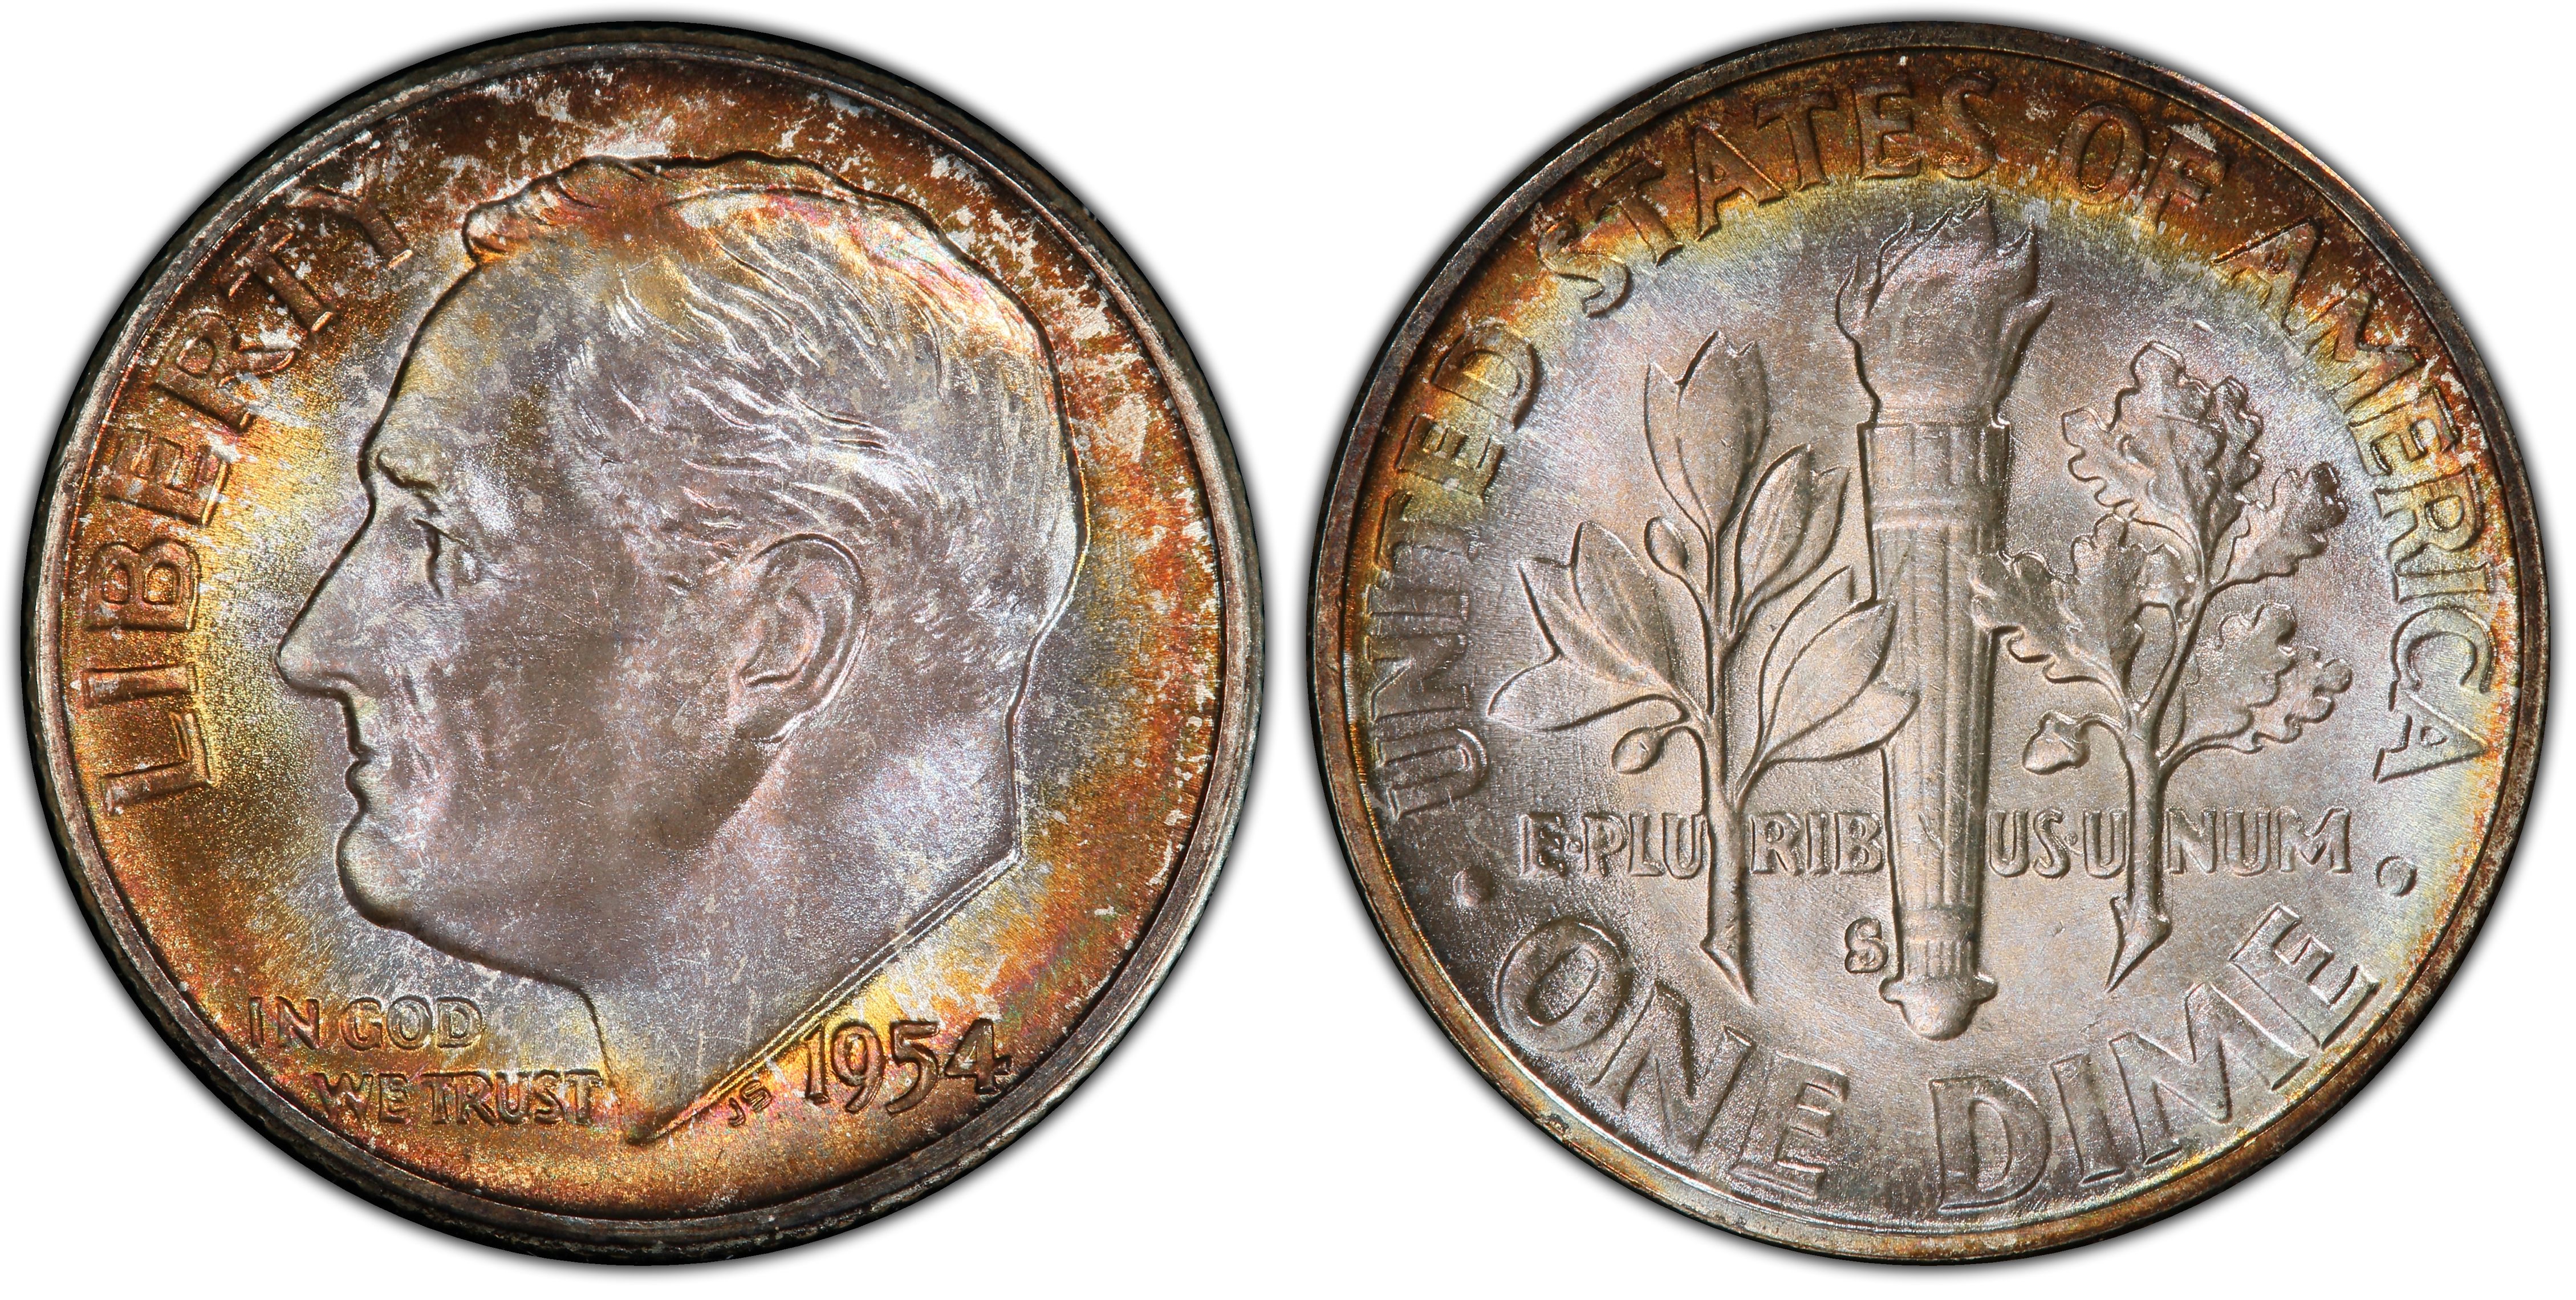 1954-S 10C (Regular Strike) Roosevelt Dime - PCGS CoinFacts